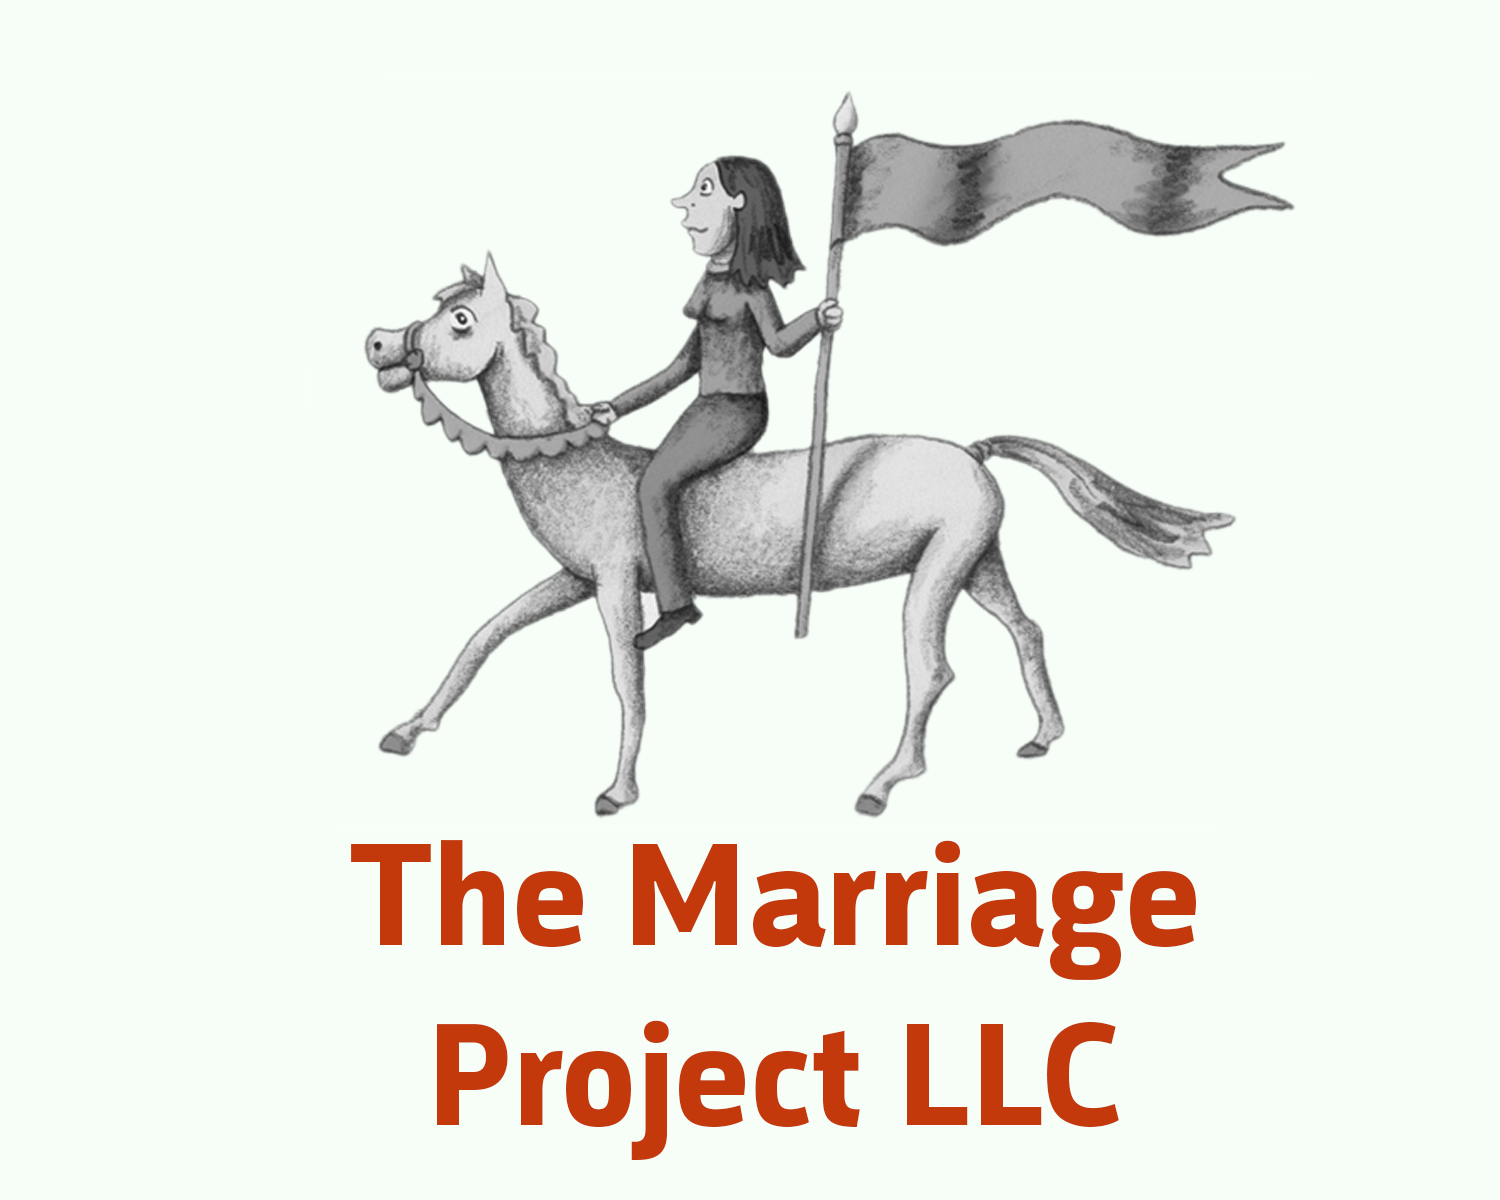 The Marriage Project LLC logo